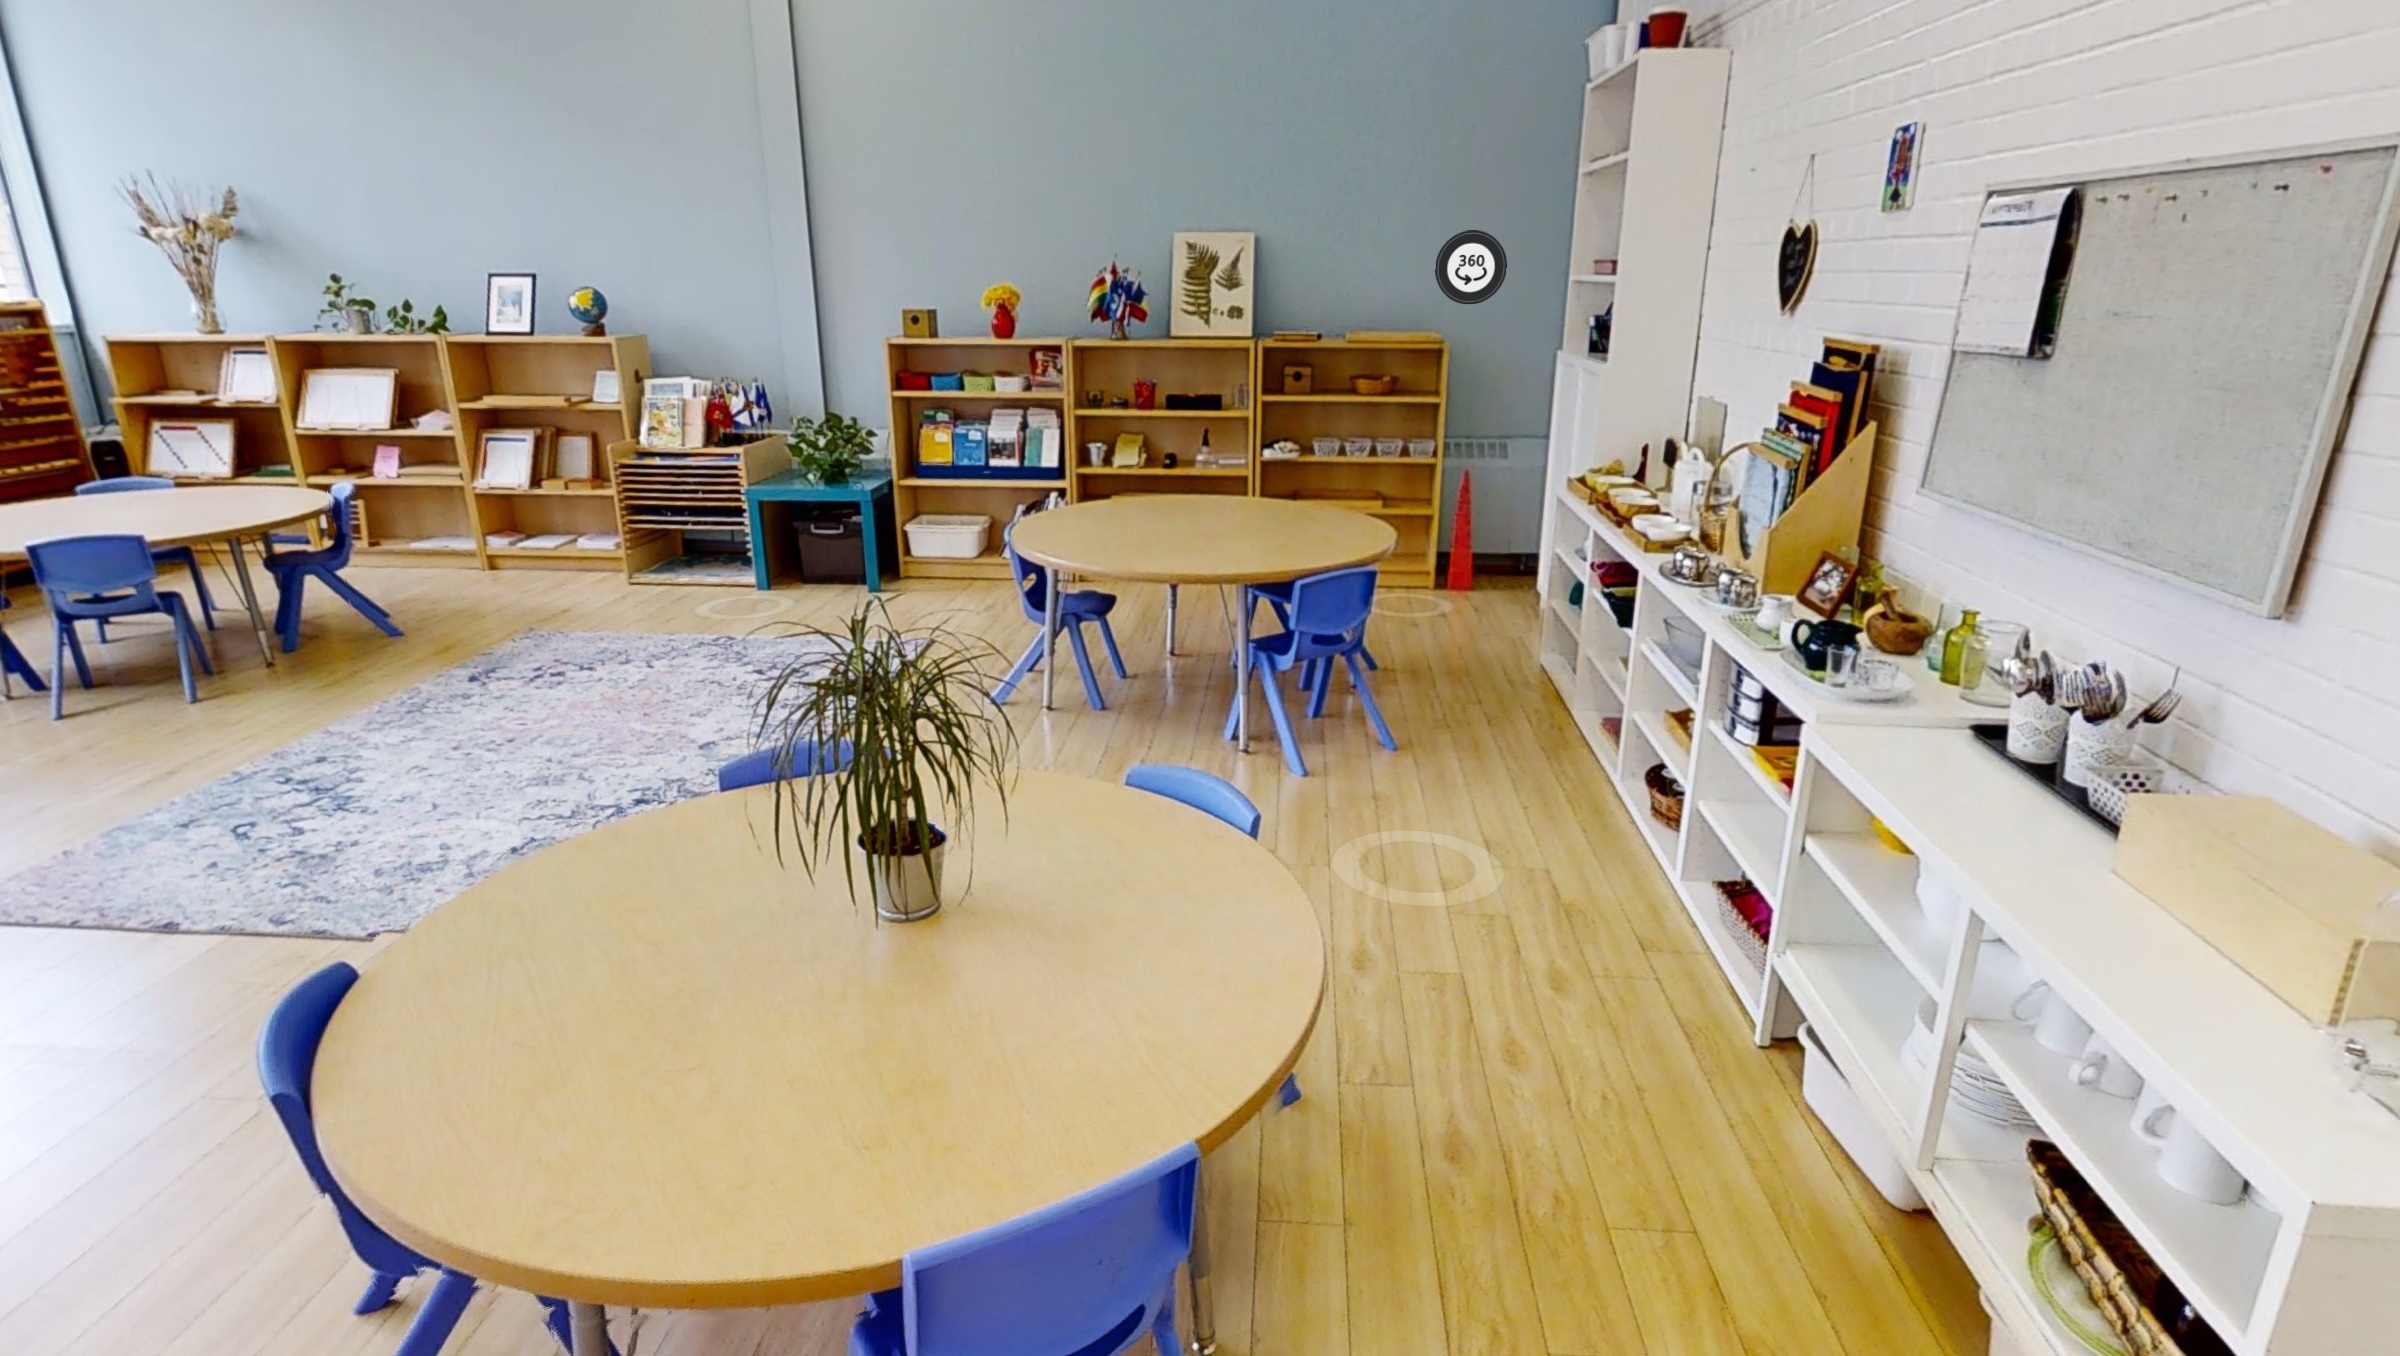 Have a peek inside one of our beautiful primary classroom in action as a sample of what to expect.